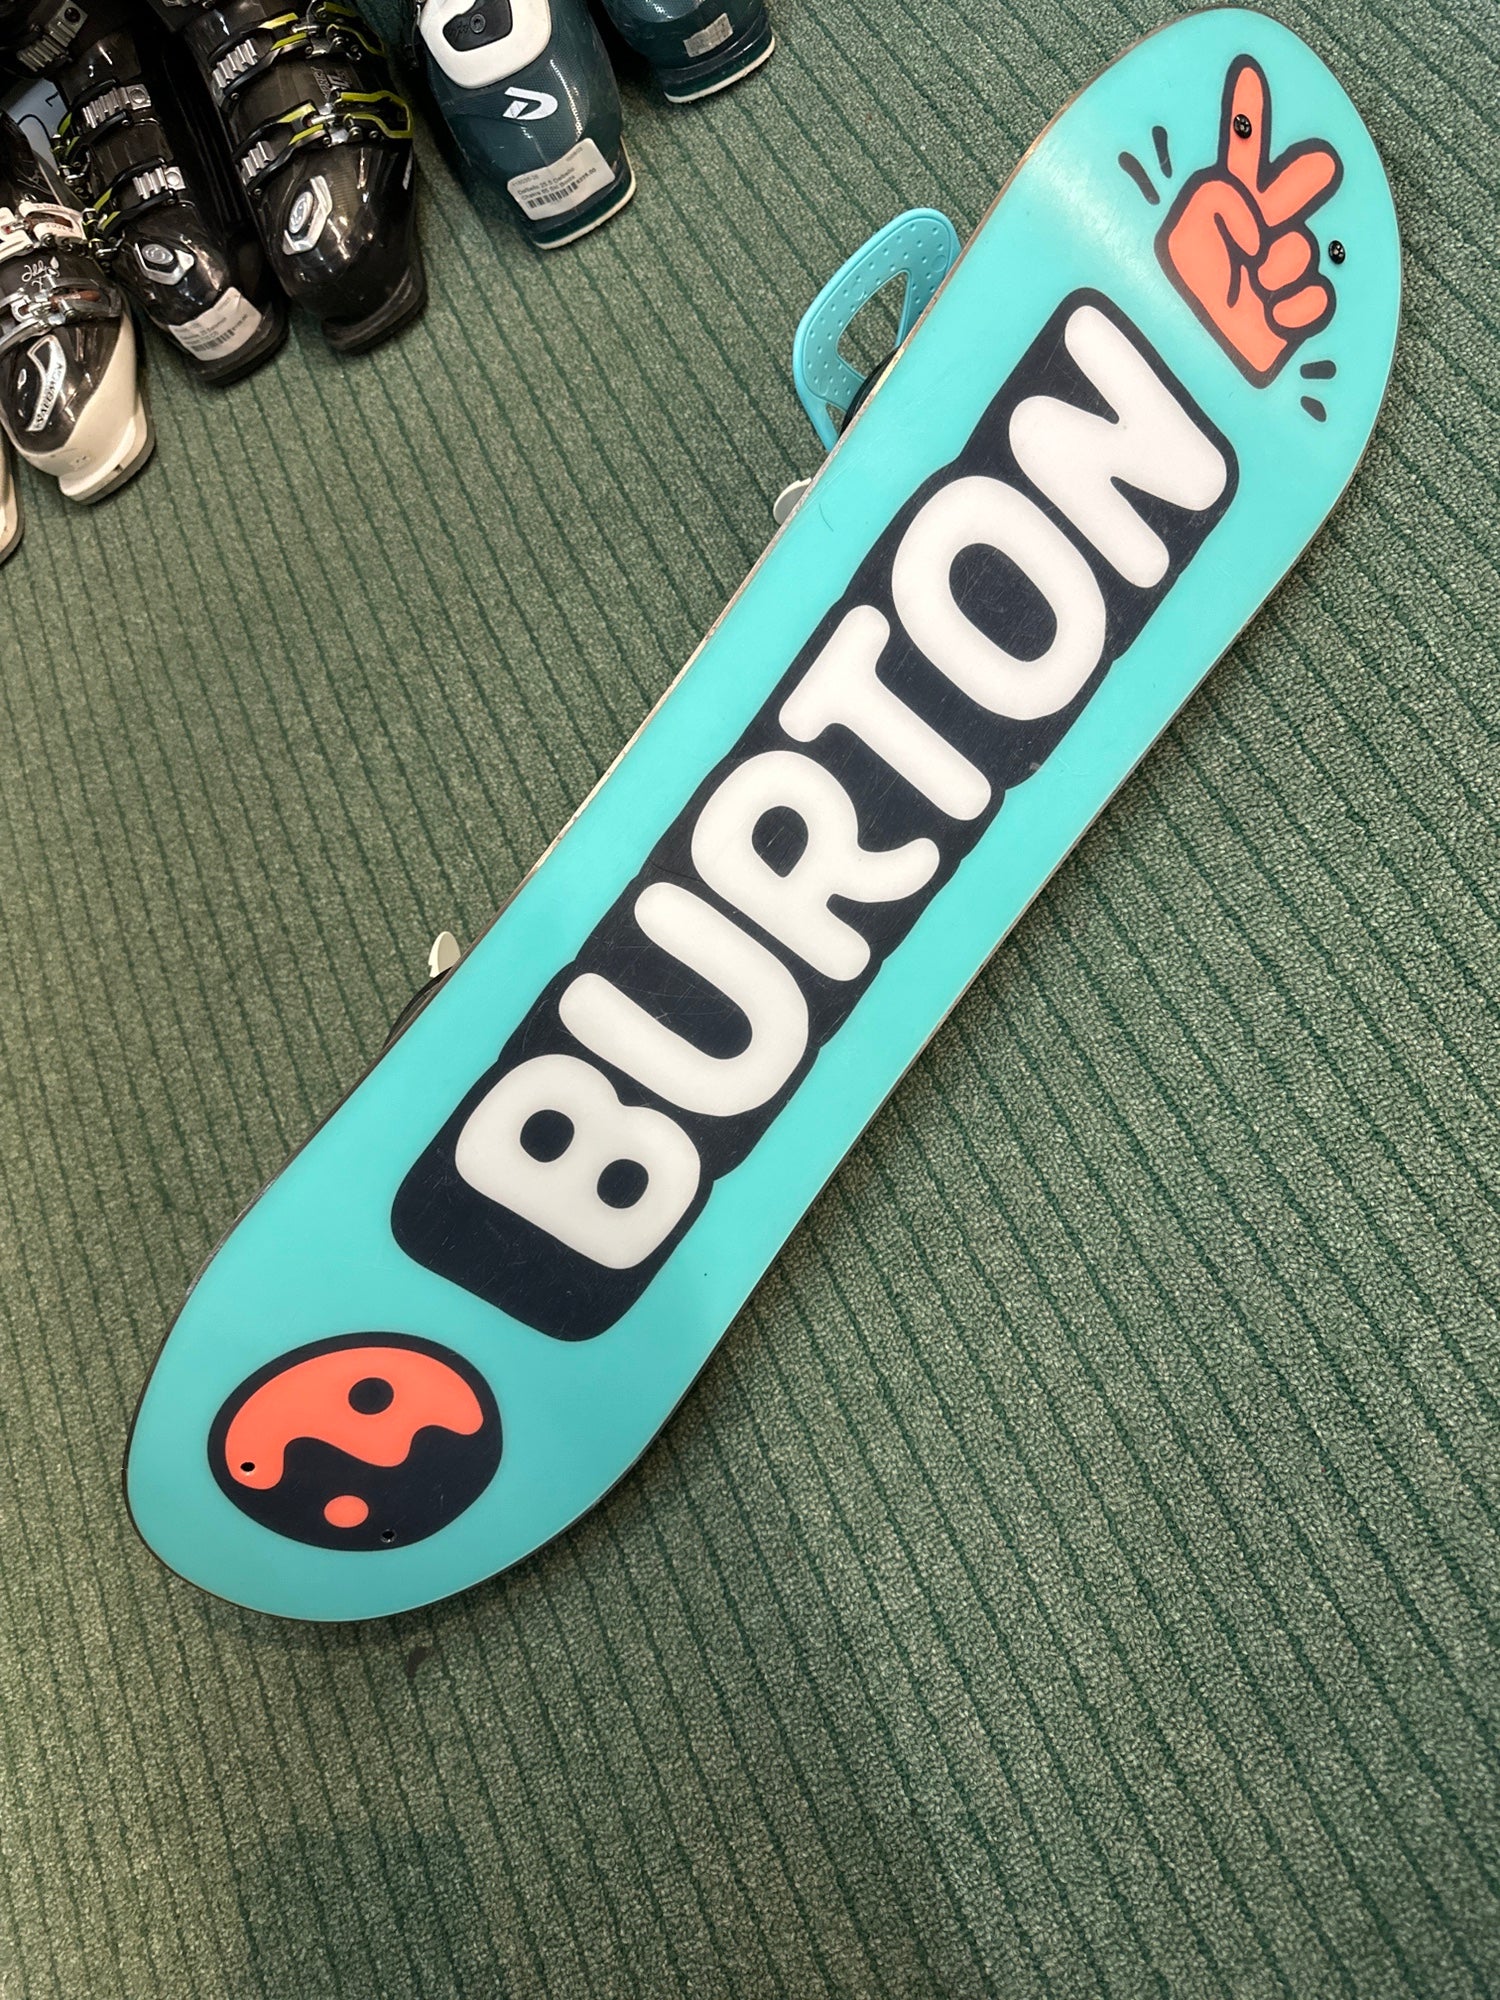 80cm Burton After School Special Youth Snowboard w/ Bindings 